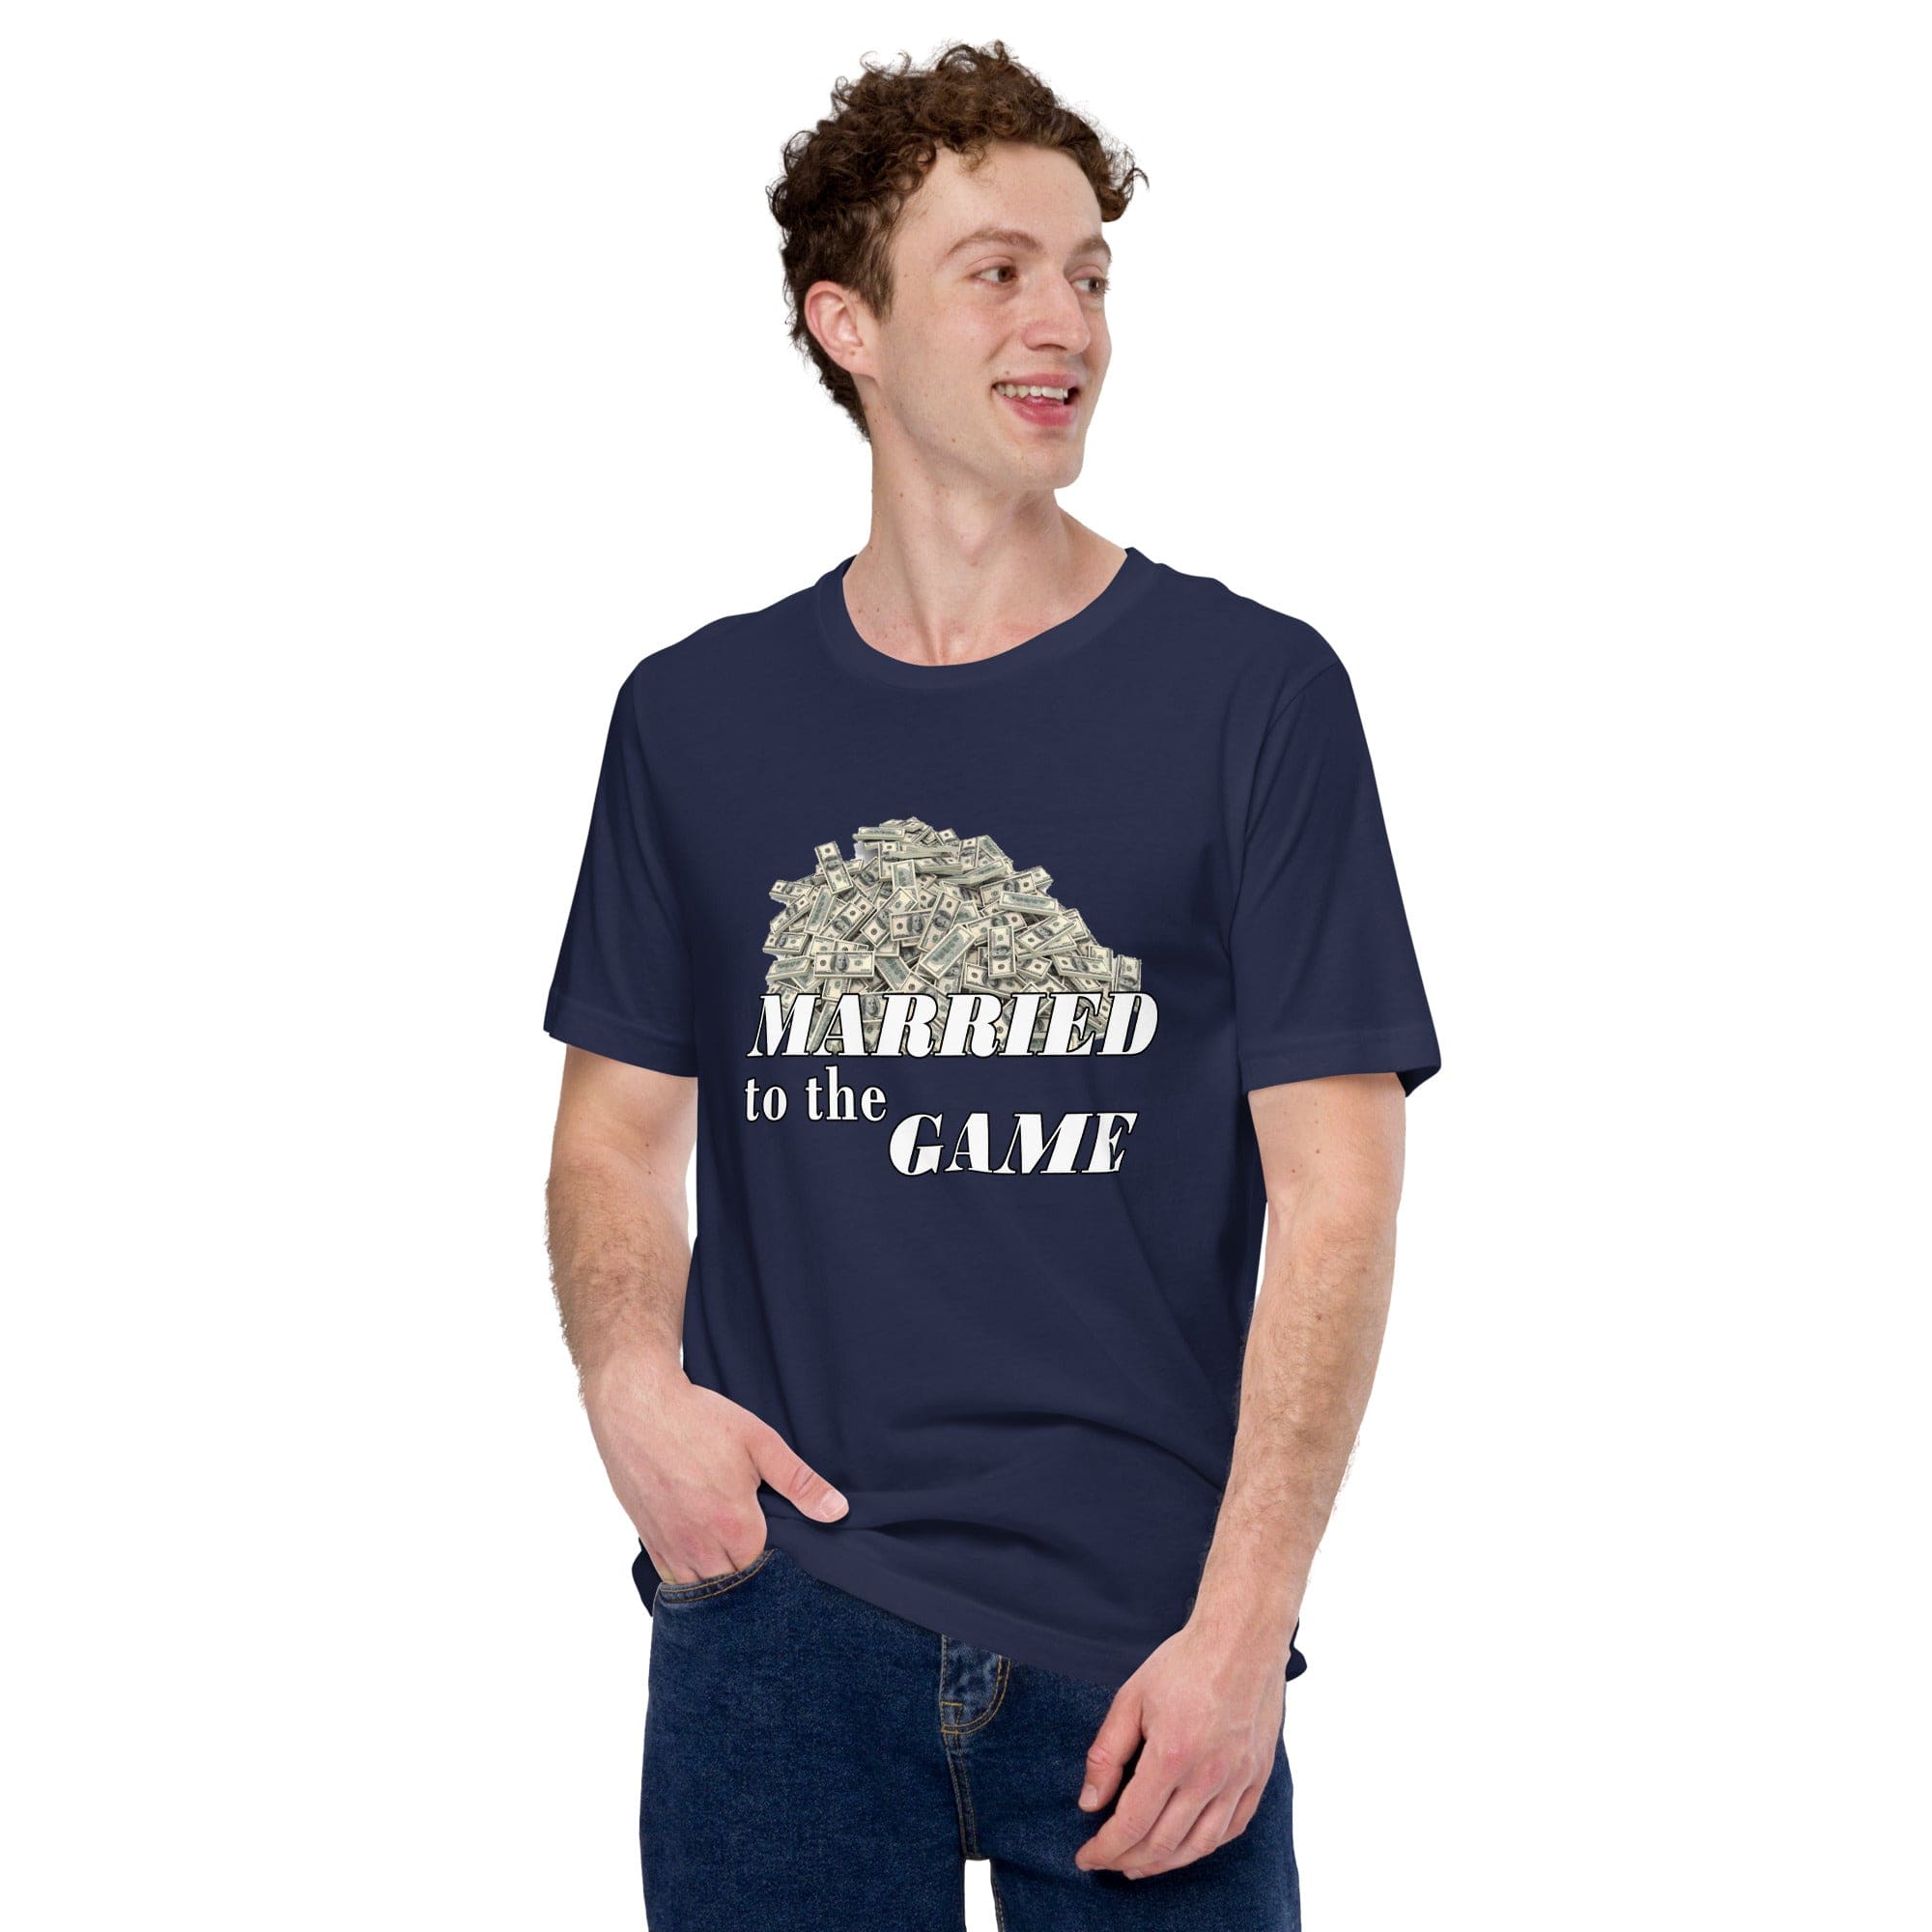 Absolutestacker2 Navy / XS Married 2 the game